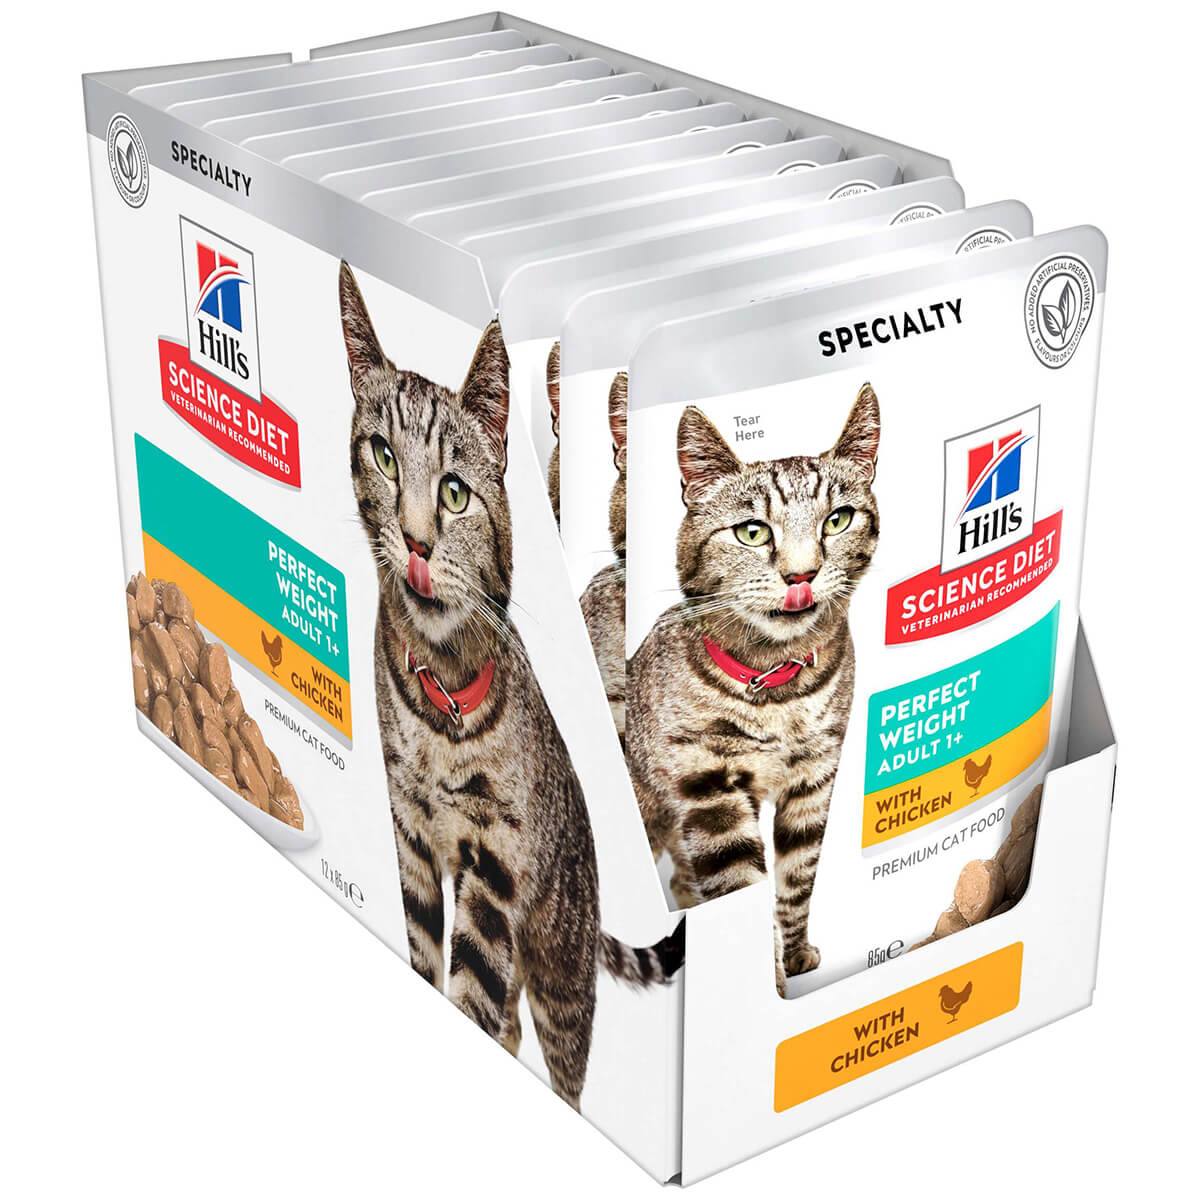 Hill's Science Diet Perfect Weight Adult Chicken Pouches Wet Cat Food 85g (132617000145) [default_color]